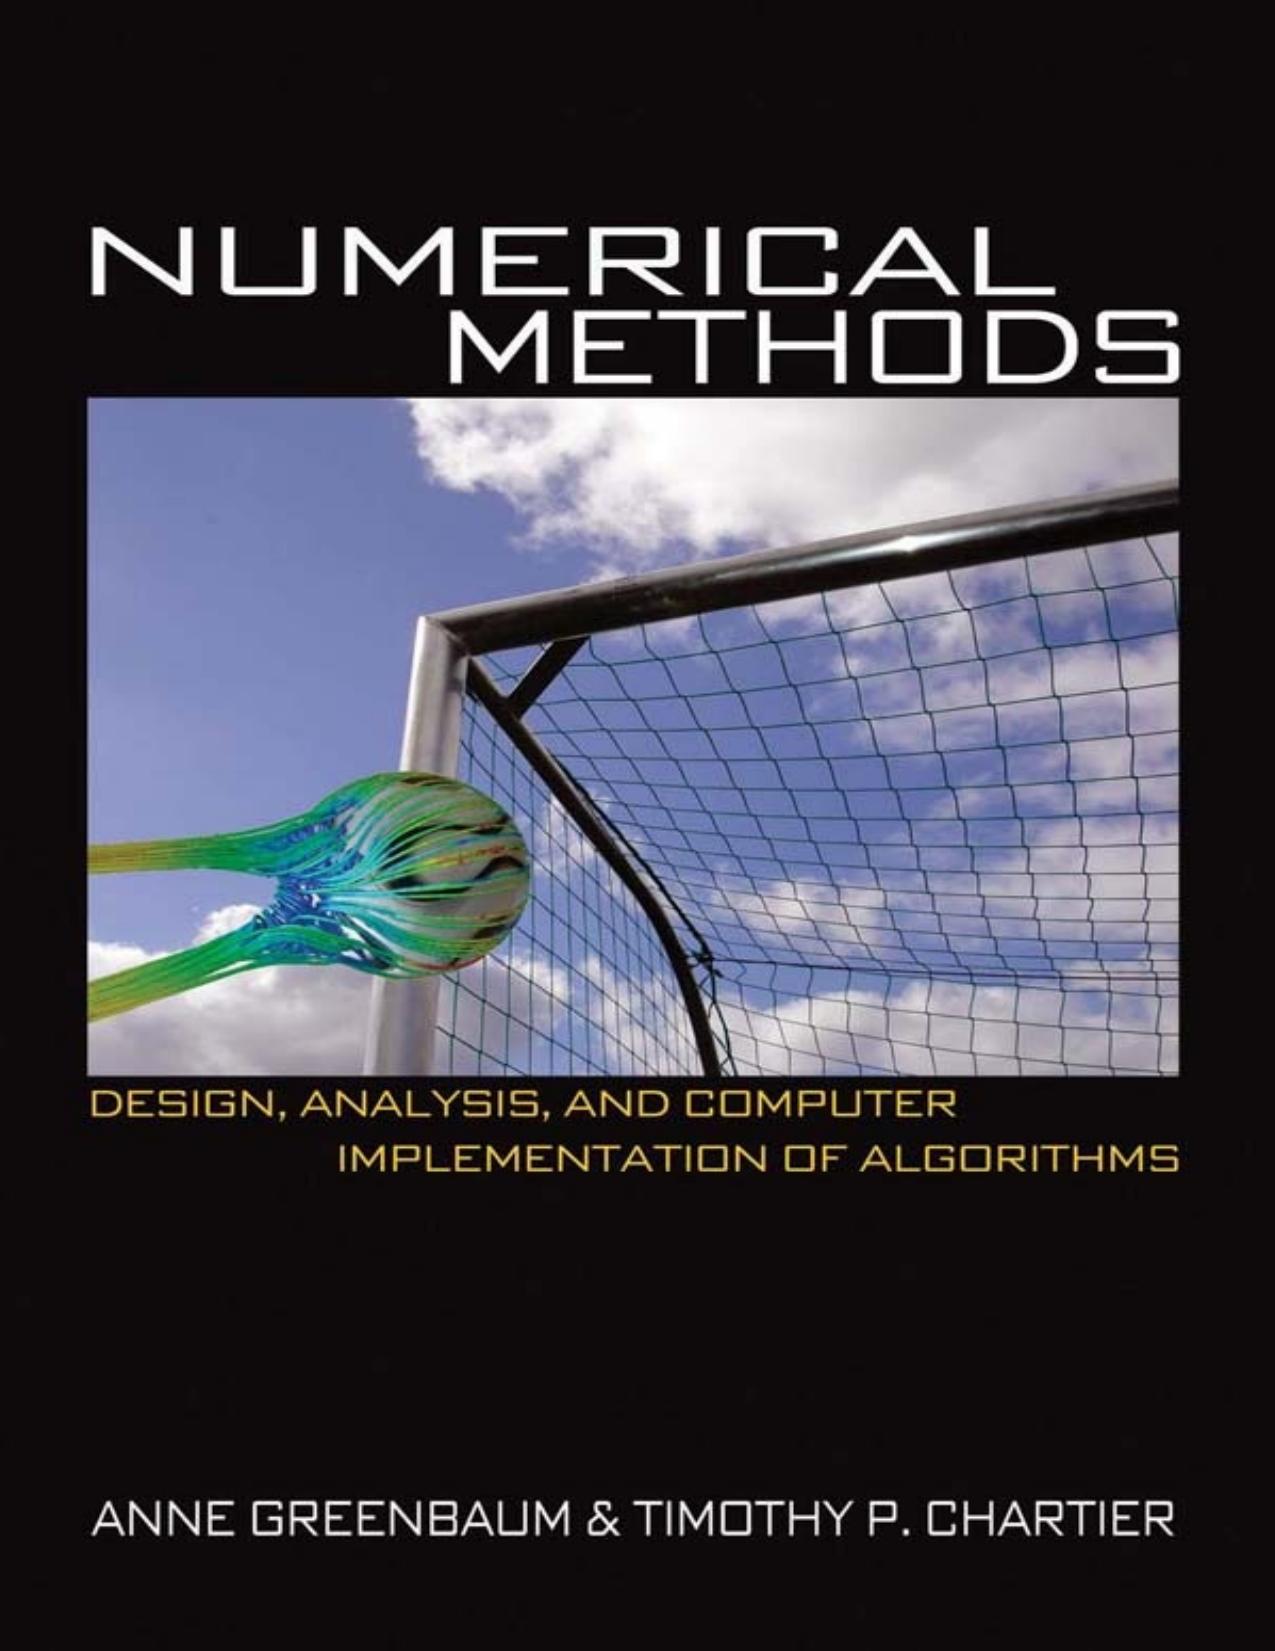 Numerical Methods_ Design, Analysis, and Computer Implementation of Algorithms.jpg